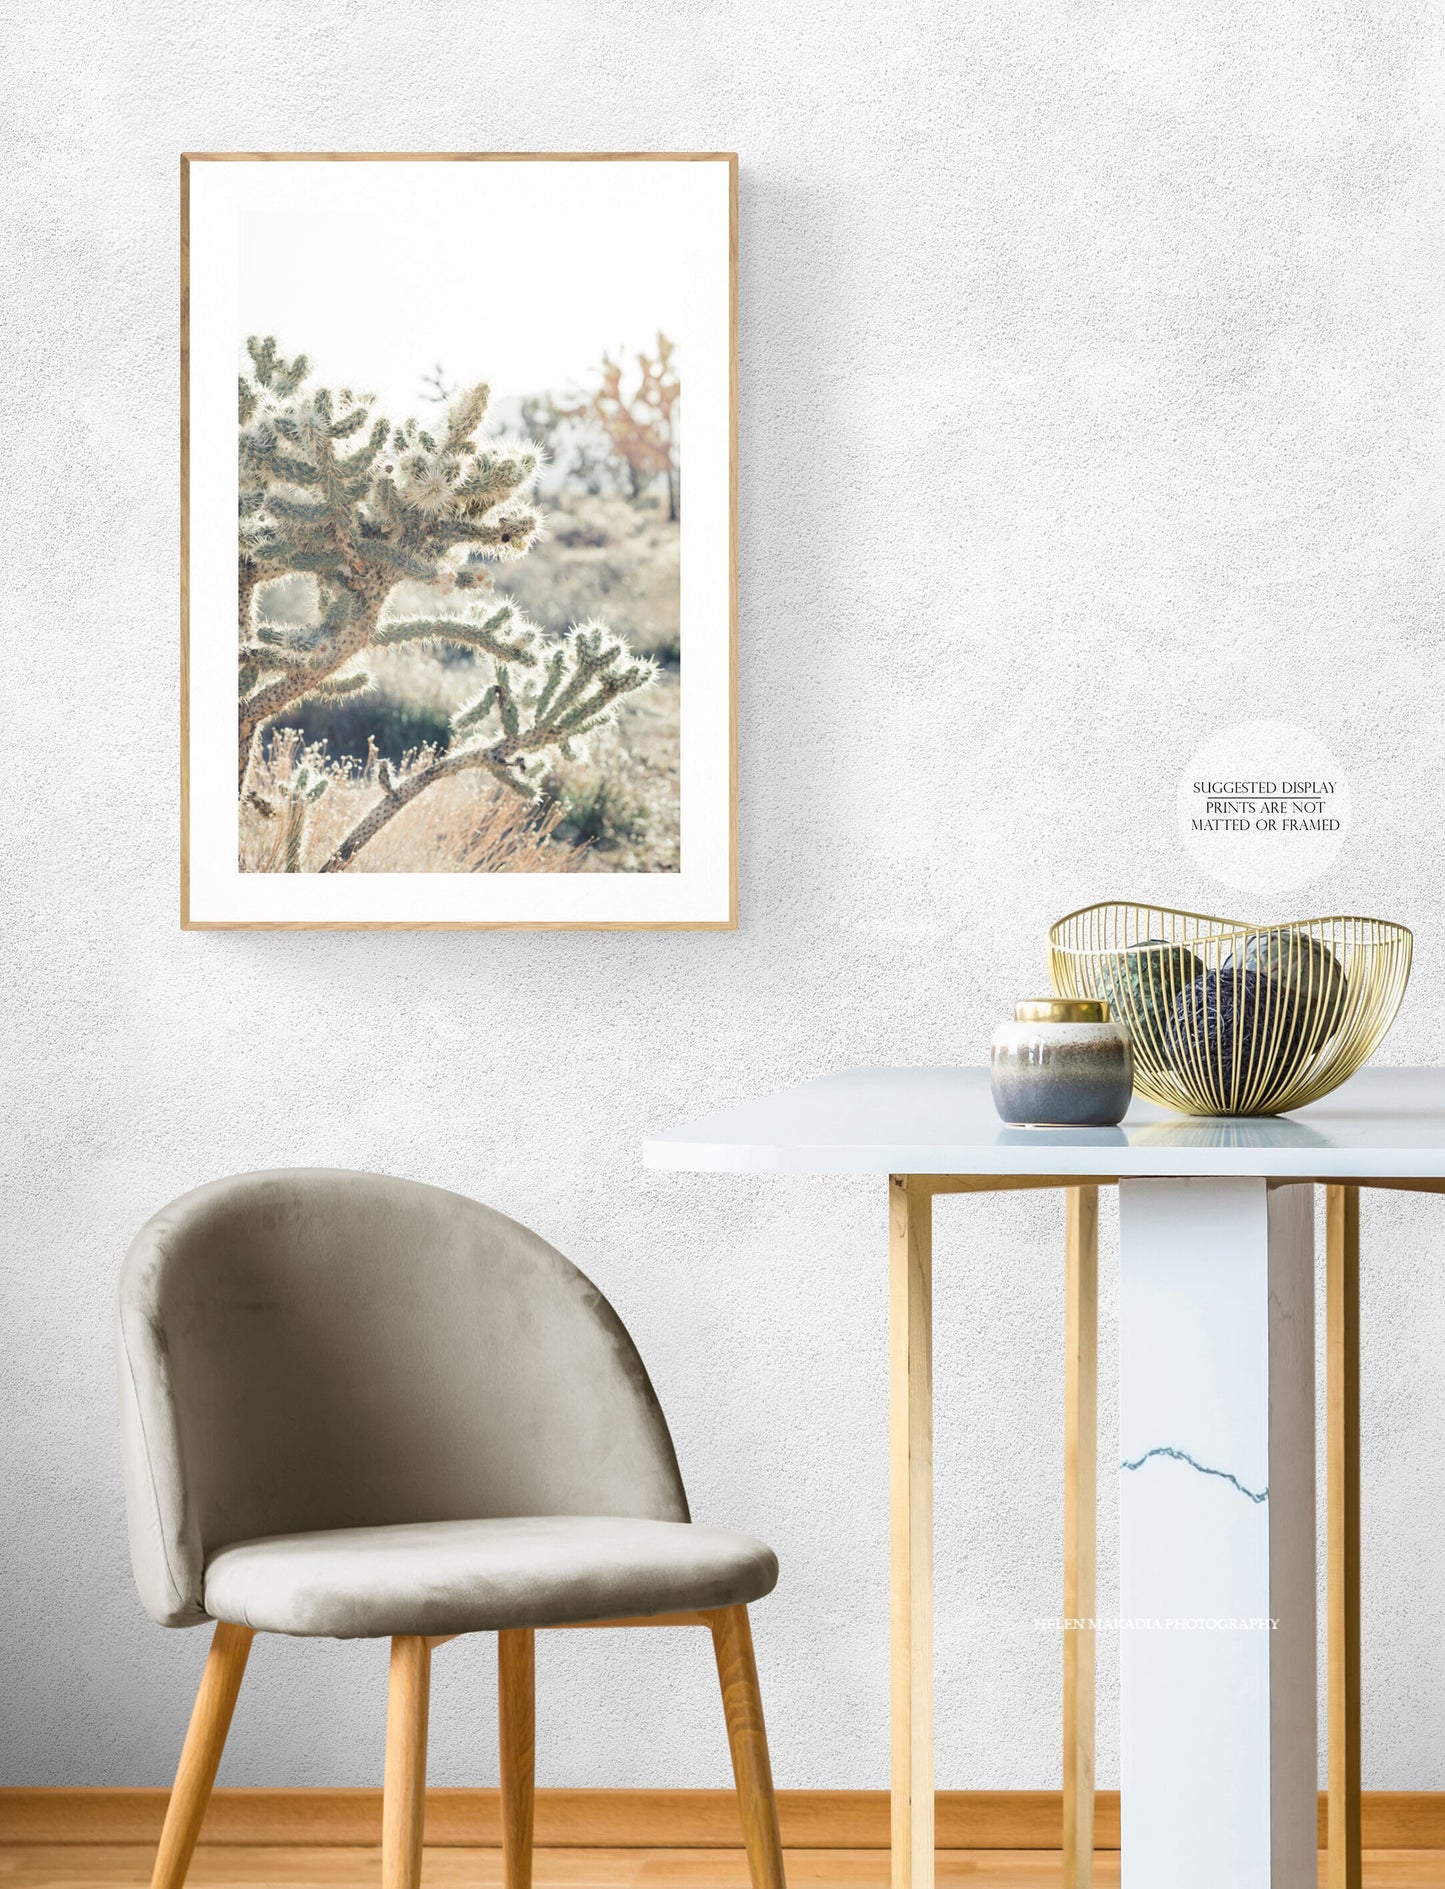 Sunlit Cactus in Joshua Tree Print Framed in a dining room